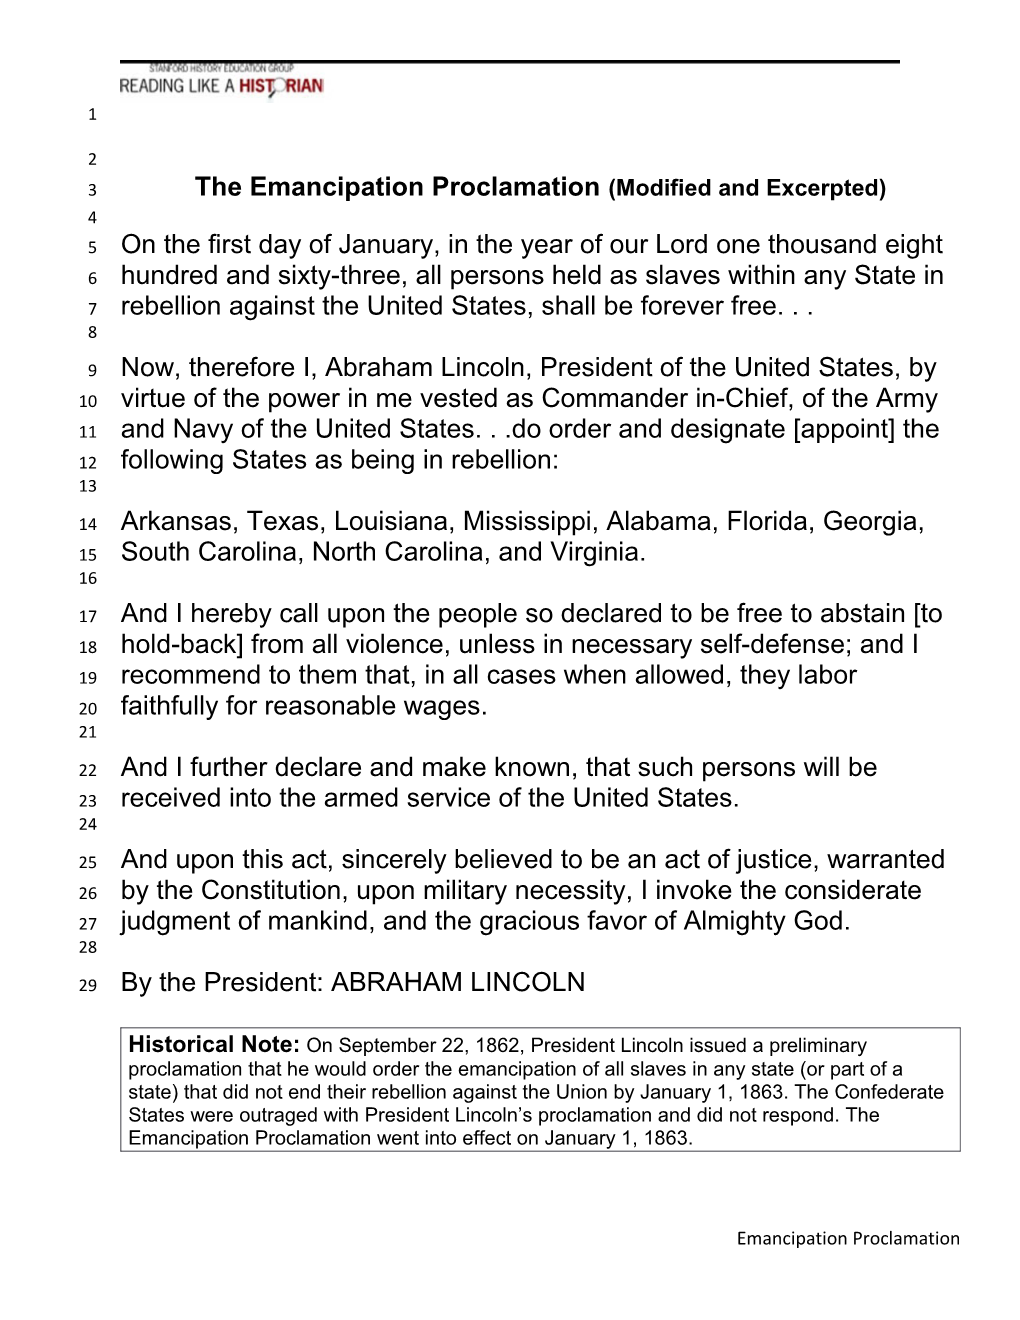 The Emancipation Proclamation (Modified and Excerpted)